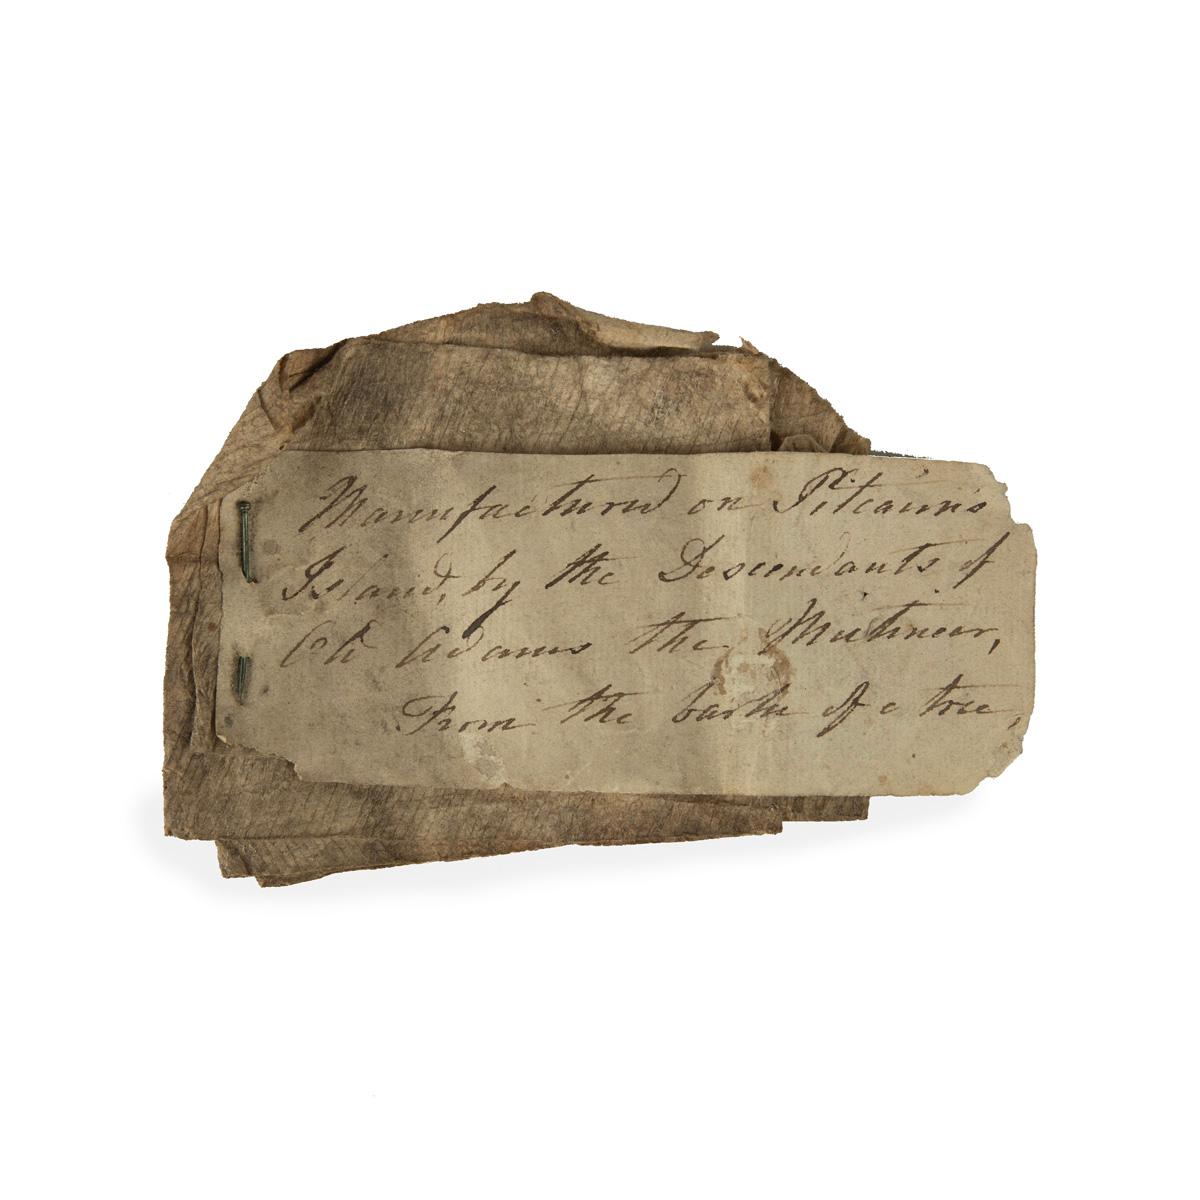 A relic from the family of Bounty Mutineer John Adams: An exceptionally rare documented piece of Bark Cloth from the Pitcairn Islands, with a fragment of paper pinned to it stating ‘Manufactured at Pitcairn’s Island, by the descendants of John Adams